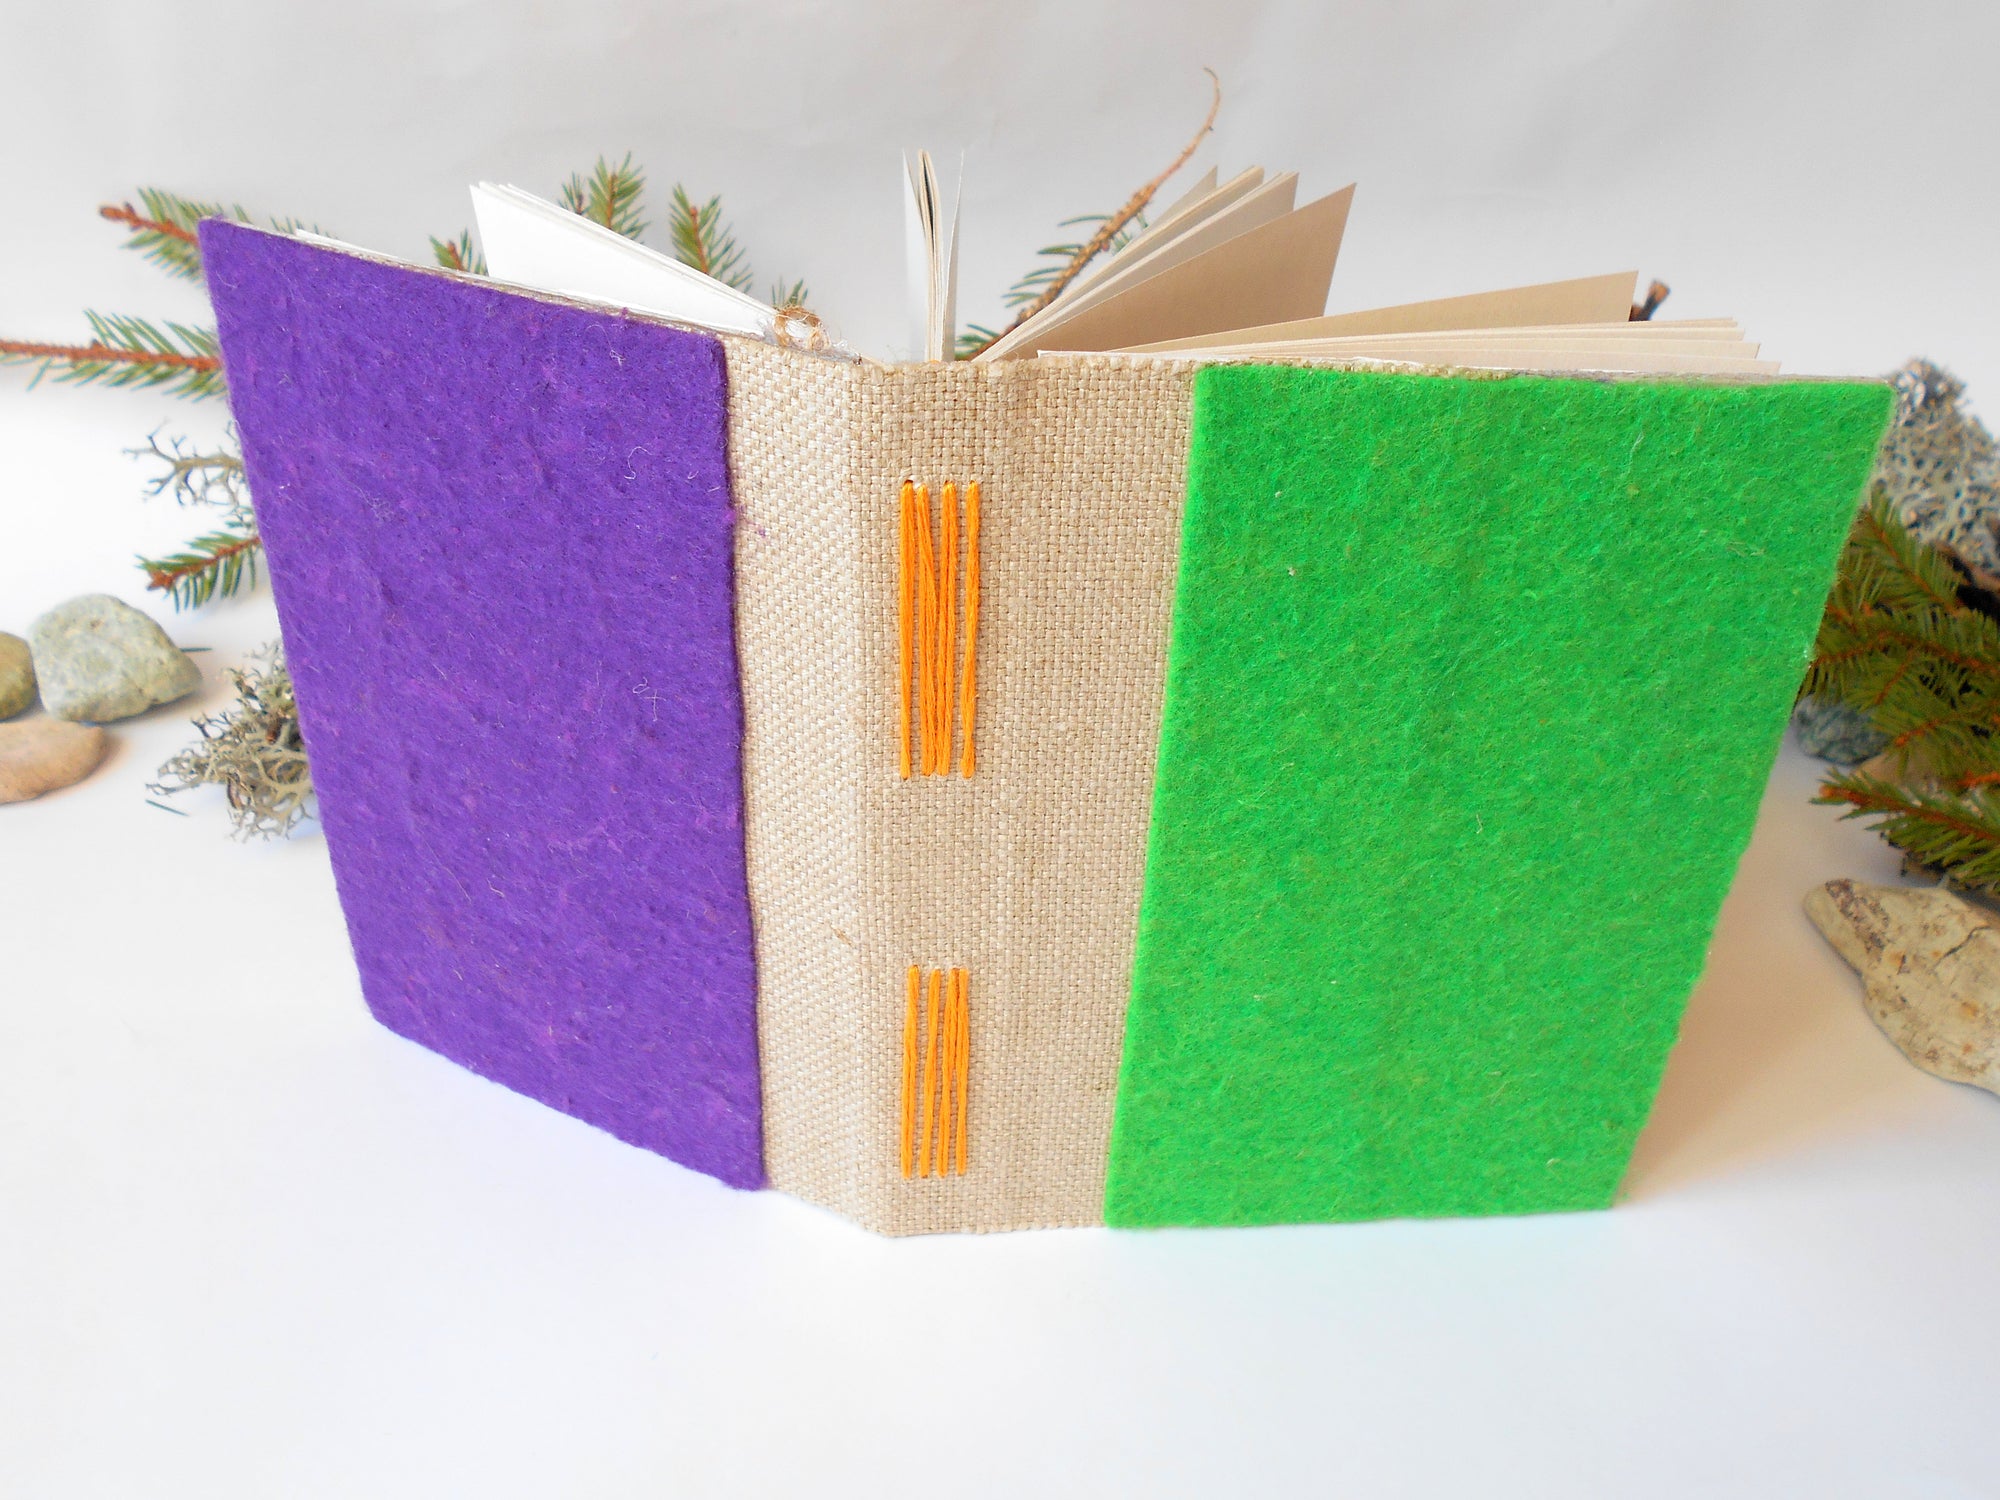 Handmade fabric and felt hardcover journal with linen fabric and green and purple felt covers with orange bookbinding and hardspine by ExiArts from Bulgaria.